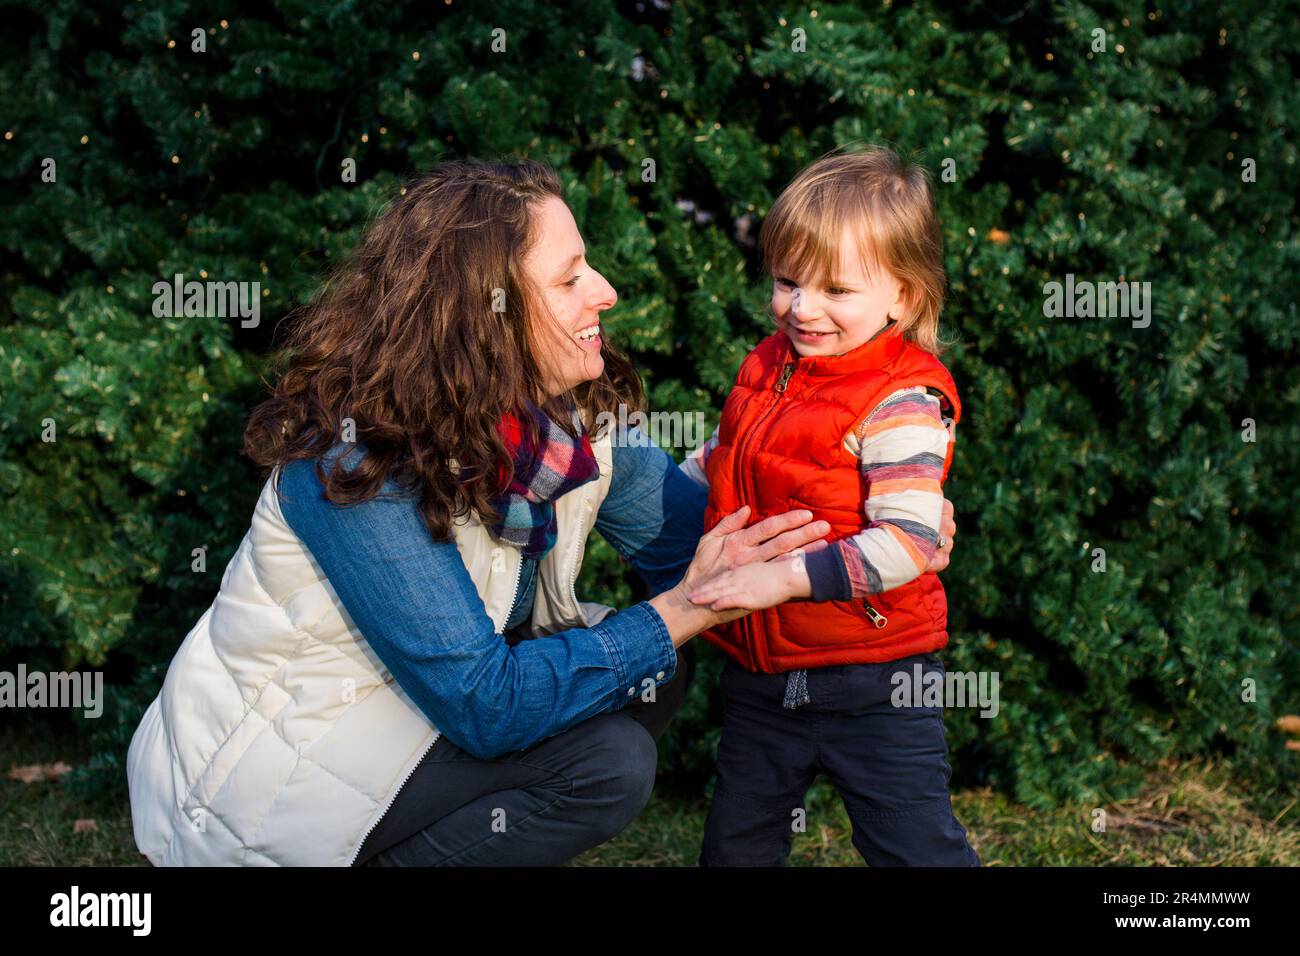 A laughing mother and small child sit together in front of lit-up tree Stock Photo